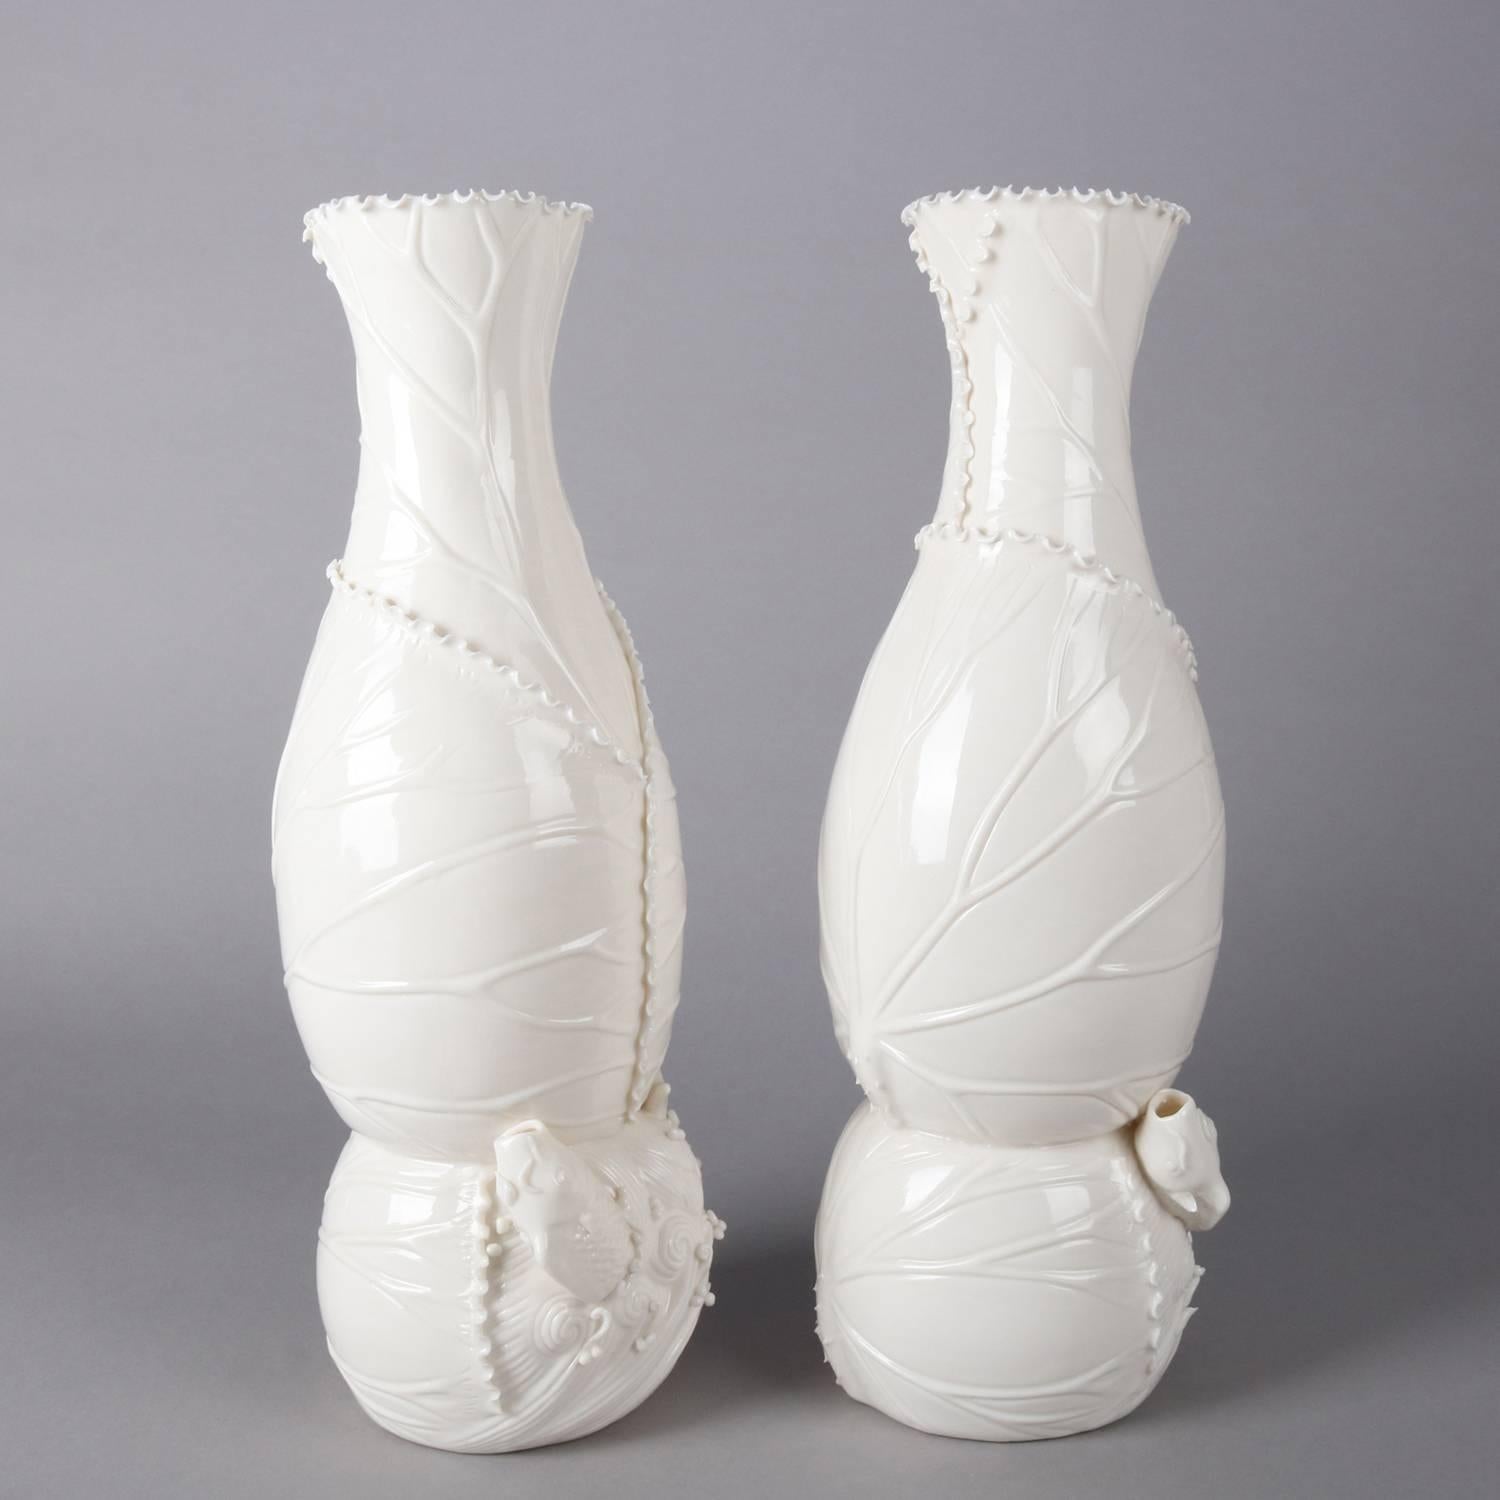 Pair of Blanc do Chine figural porcelain vases features coral reef, beach and shore motif including ocean fish and plant life and stylized waves, ruffled rims, signed on base as photographed, 20th century

Measure - 14